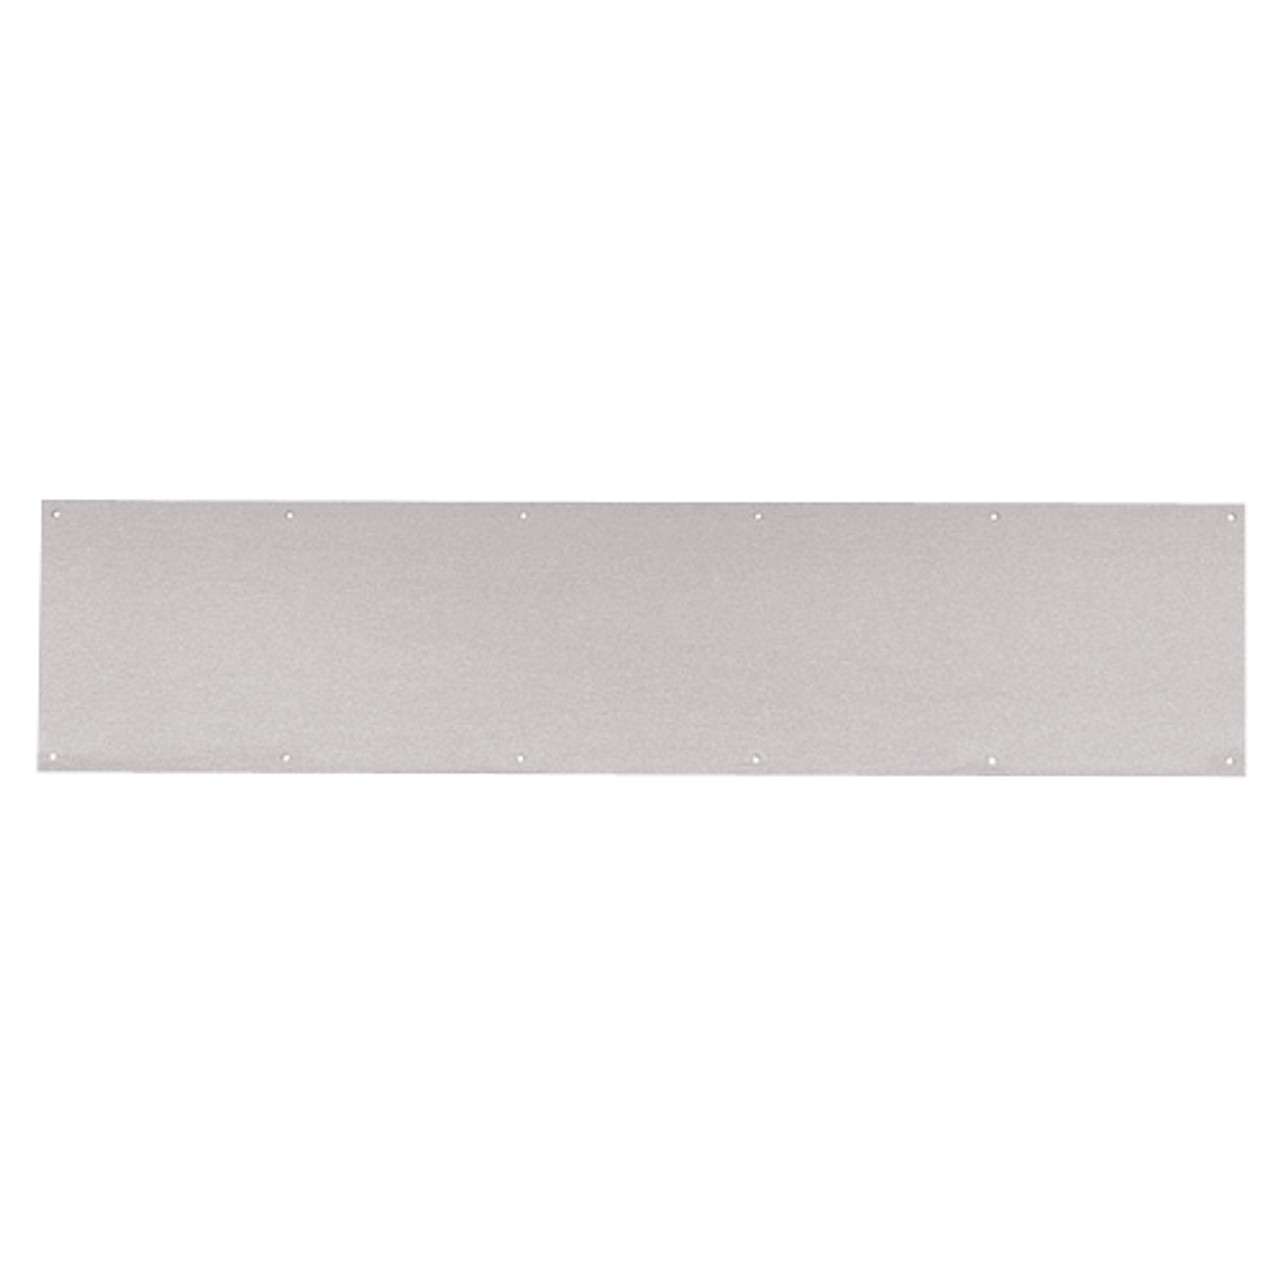 8400-US32D-34x43-B-CS Ives 8400 Series Protection Plate in Satin Stainless Steel